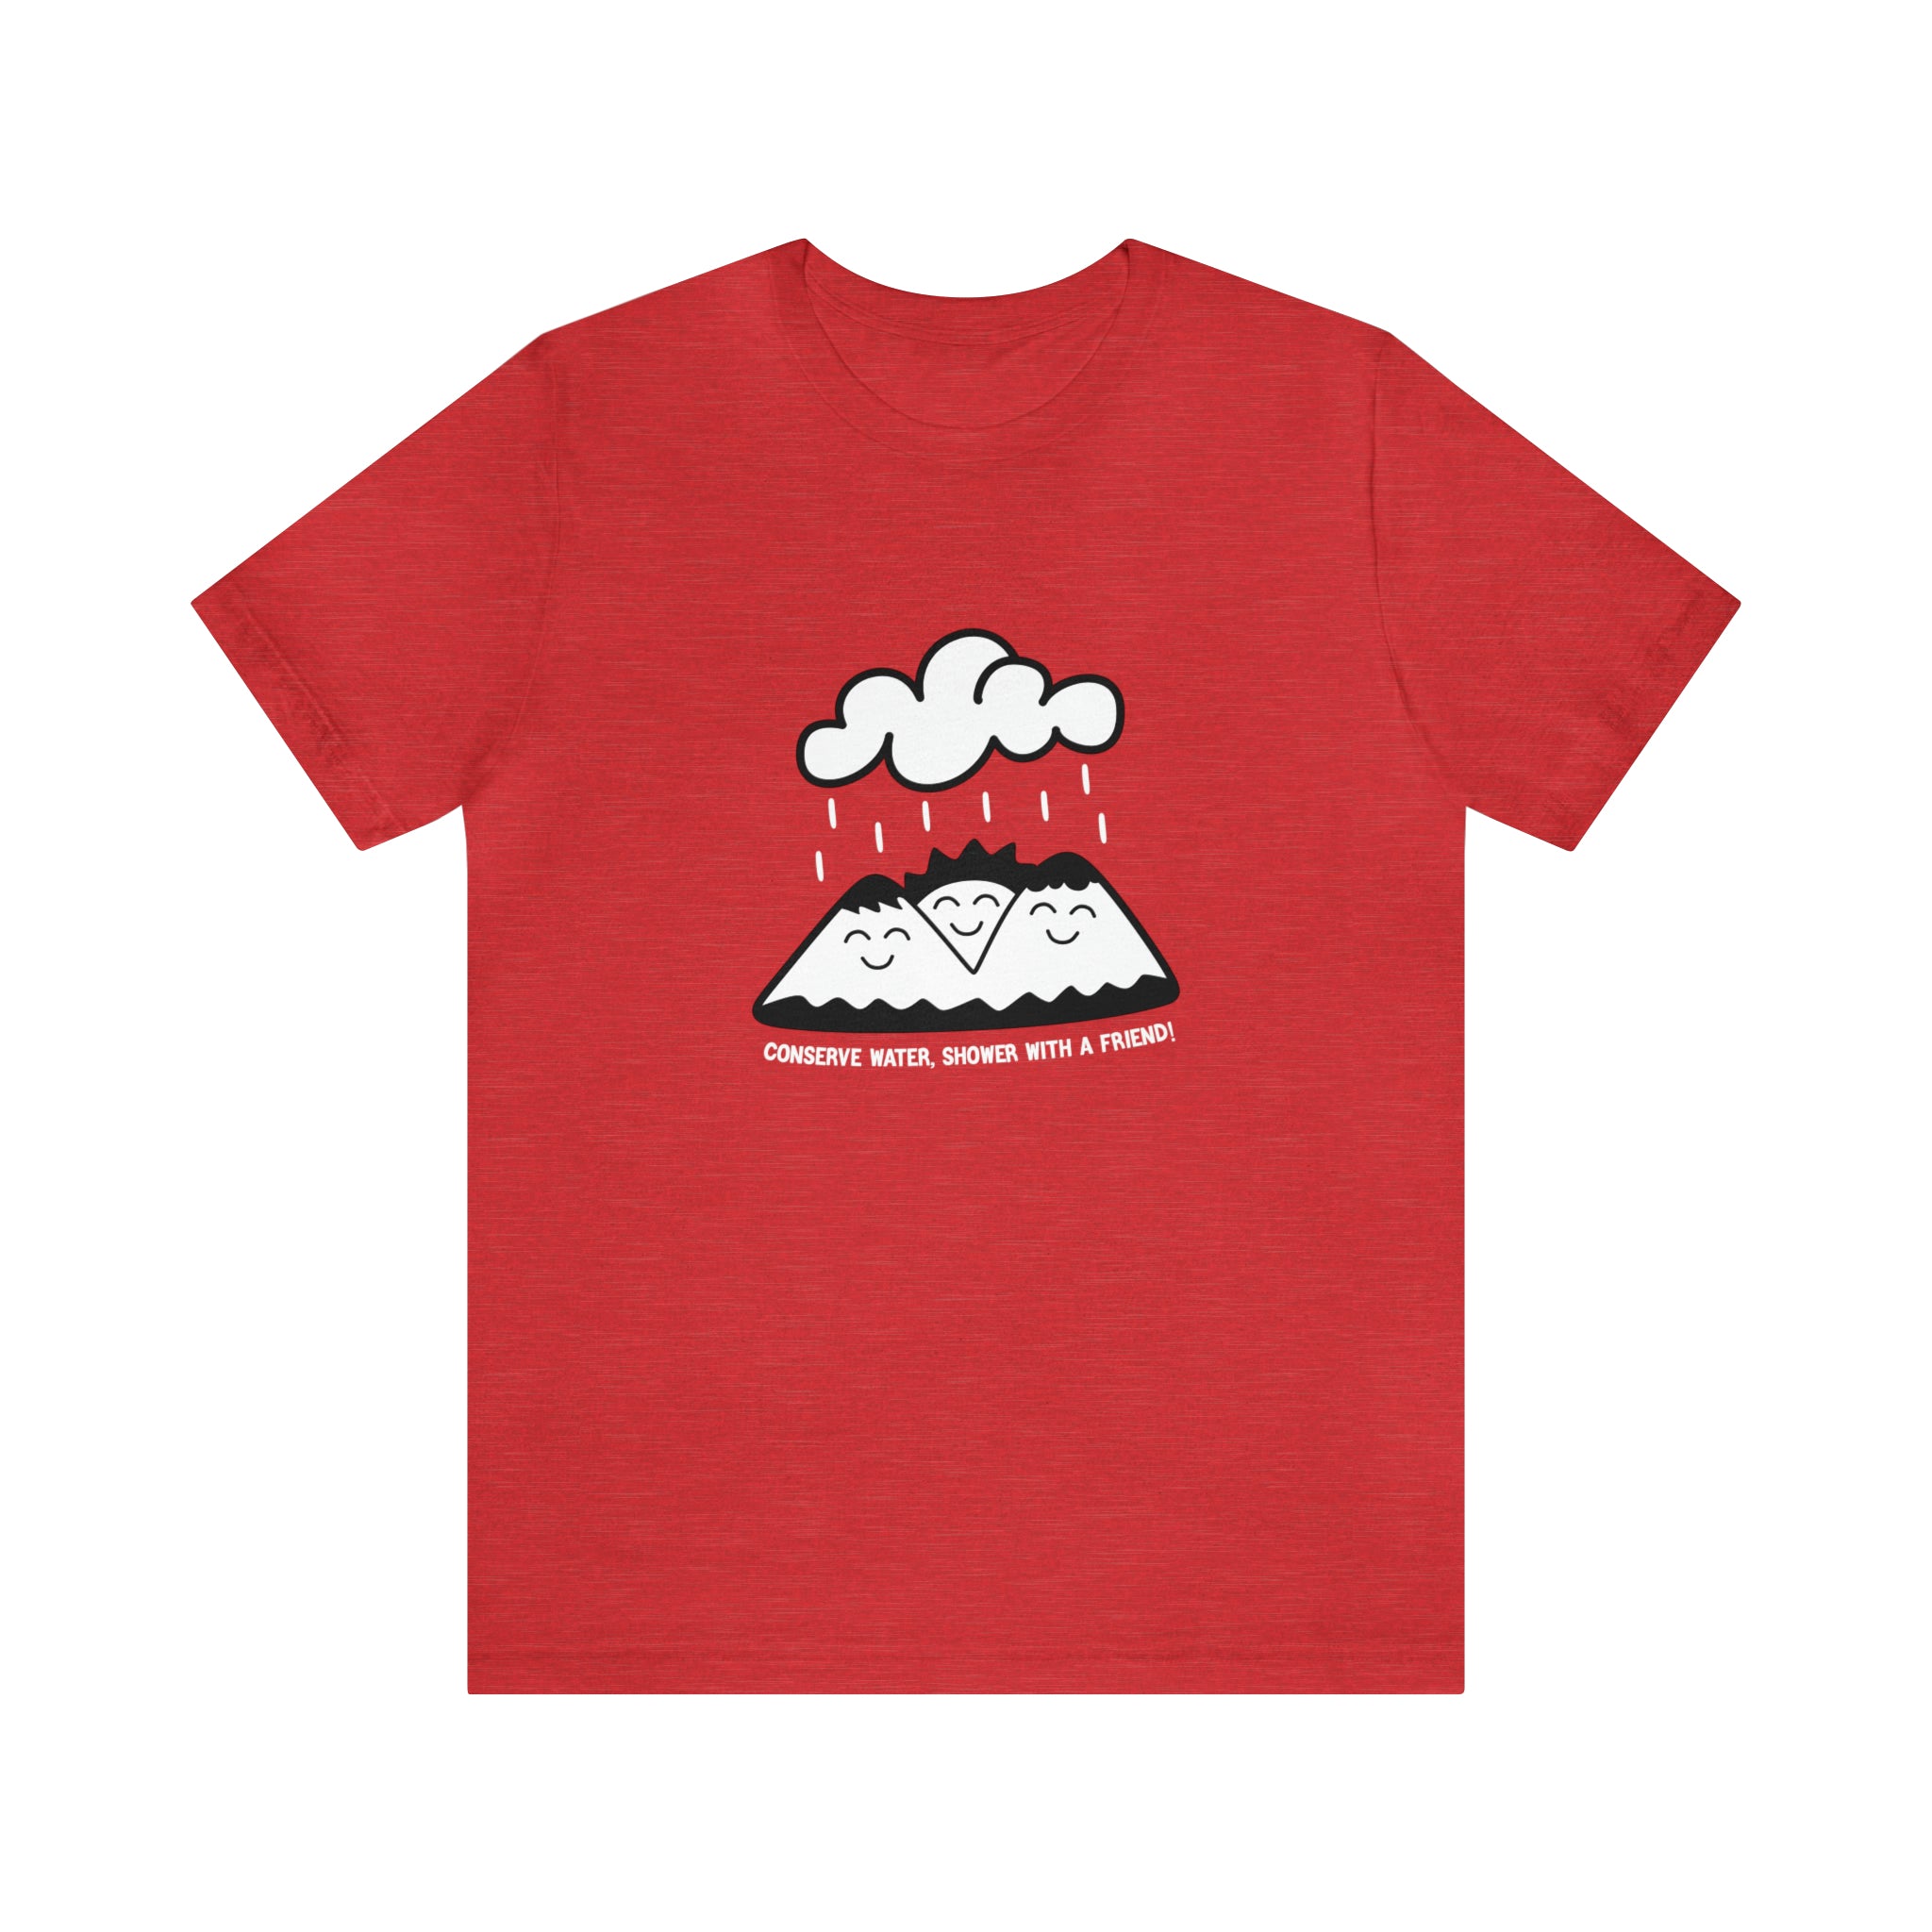 A Conserve Water Shower with a Friend T-Shirt with an image of a volcano and clouds, eco-friendly.